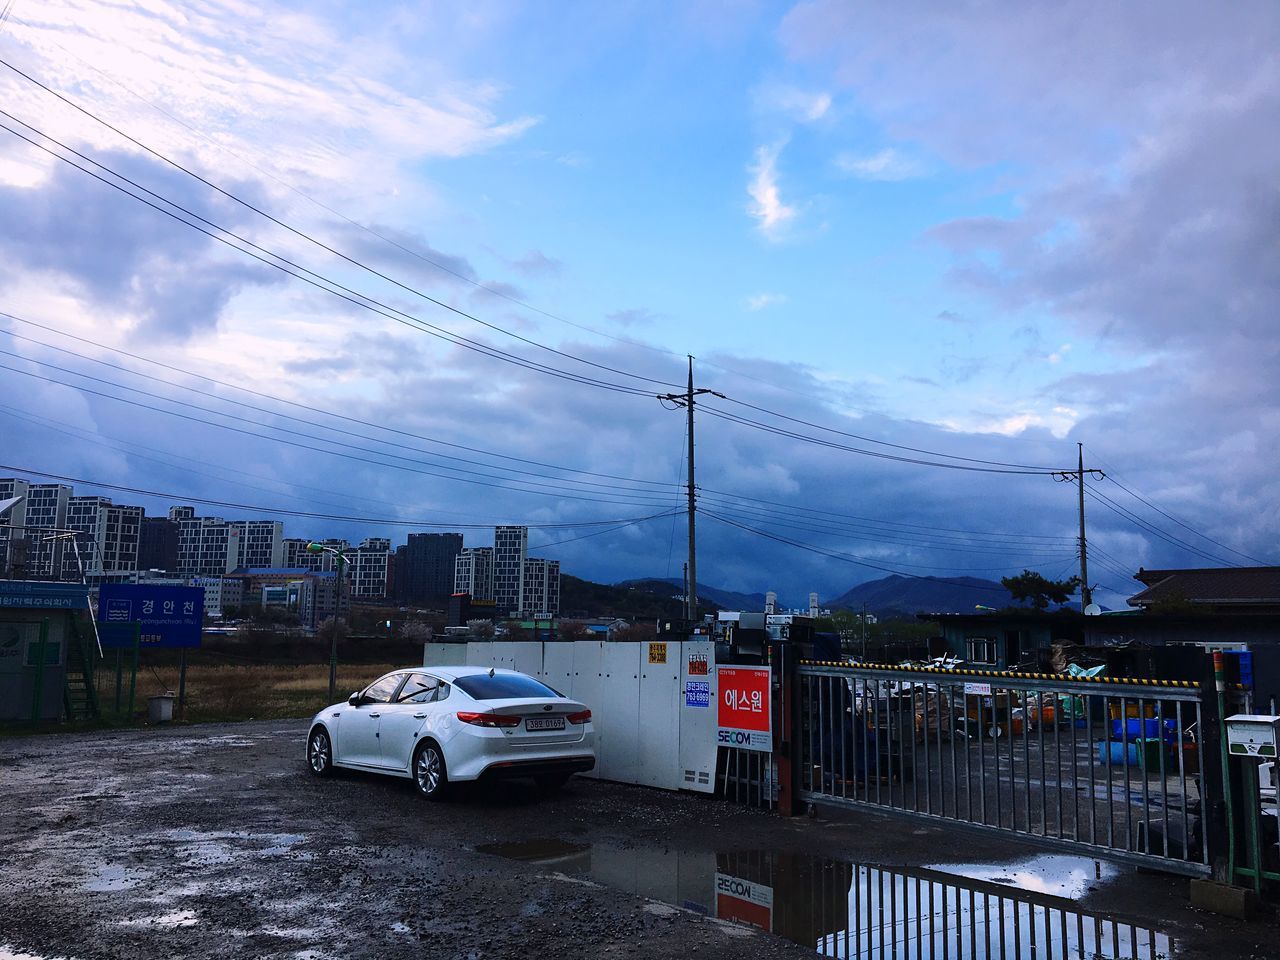 cloud - sky, sky, mode of transportation, transportation, car, motor vehicle, city, architecture, electricity, built structure, land vehicle, building exterior, nature, cable, road, power line, street, technology, no people, connection, outdoors, power supply